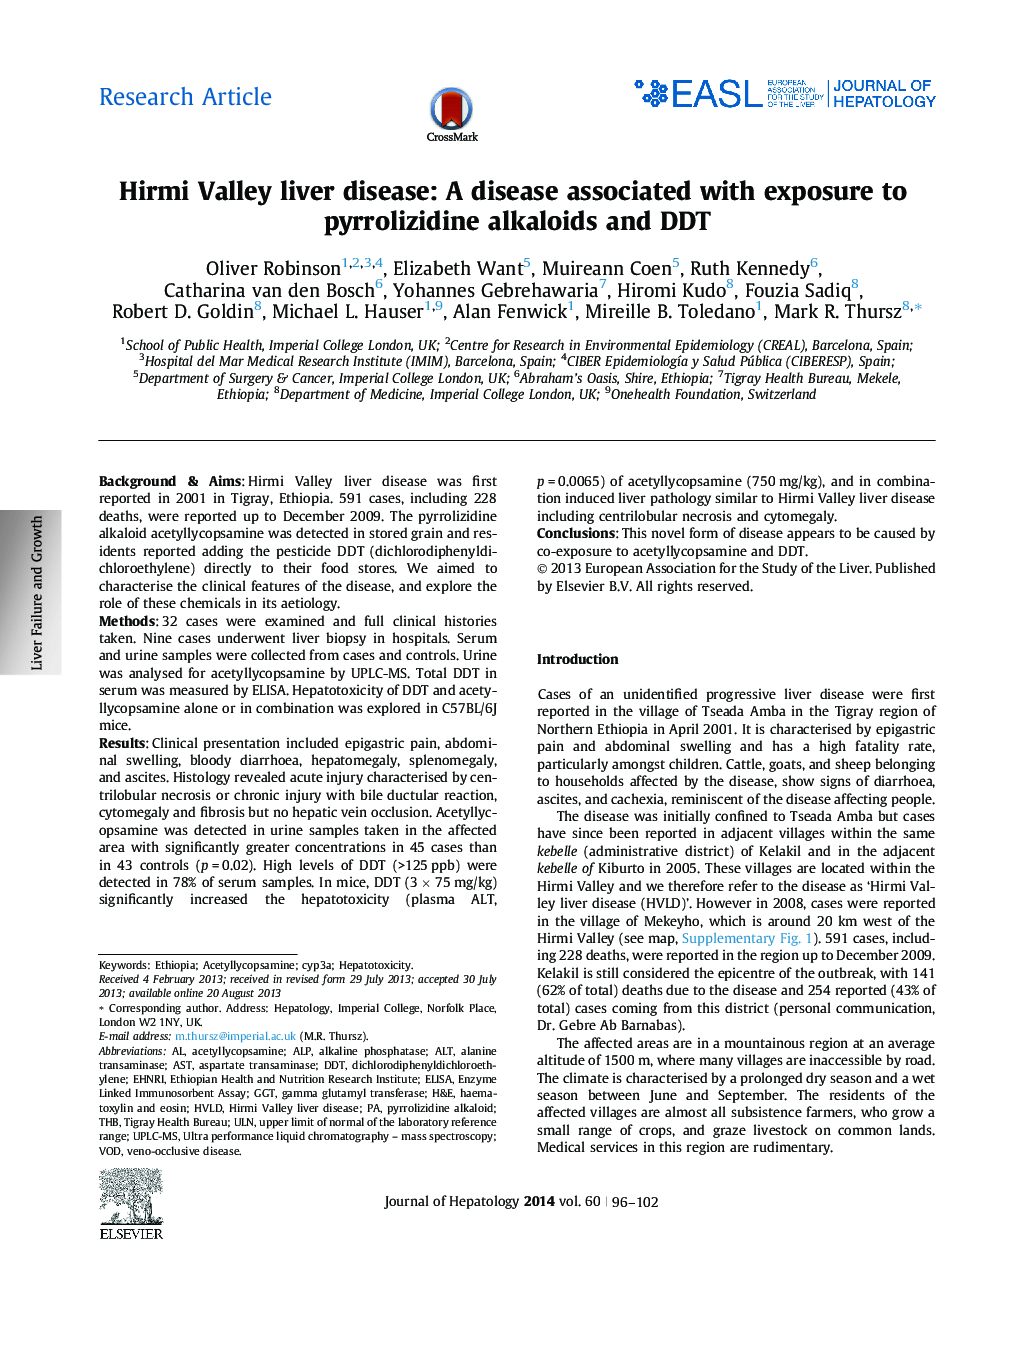 Research ArticleHirmi Valley liver disease: A disease associated with exposure to pyrrolizidine alkaloids and DDT